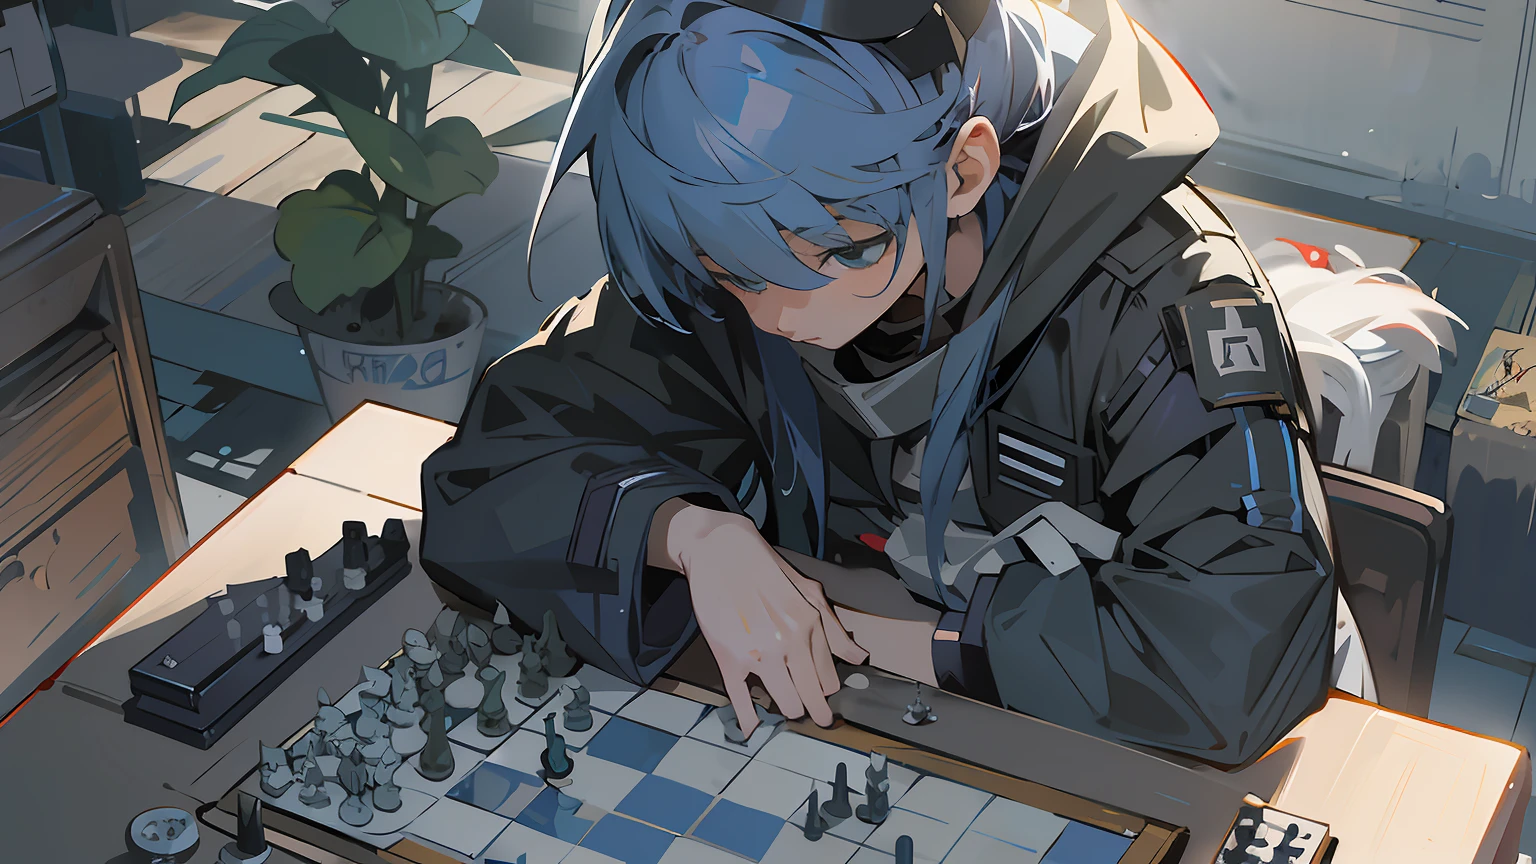 Attack on Titans chess set | Anime-themed 3D-printed chess board and pieces  | Anime | AoT, titans chess - thirstymag.com